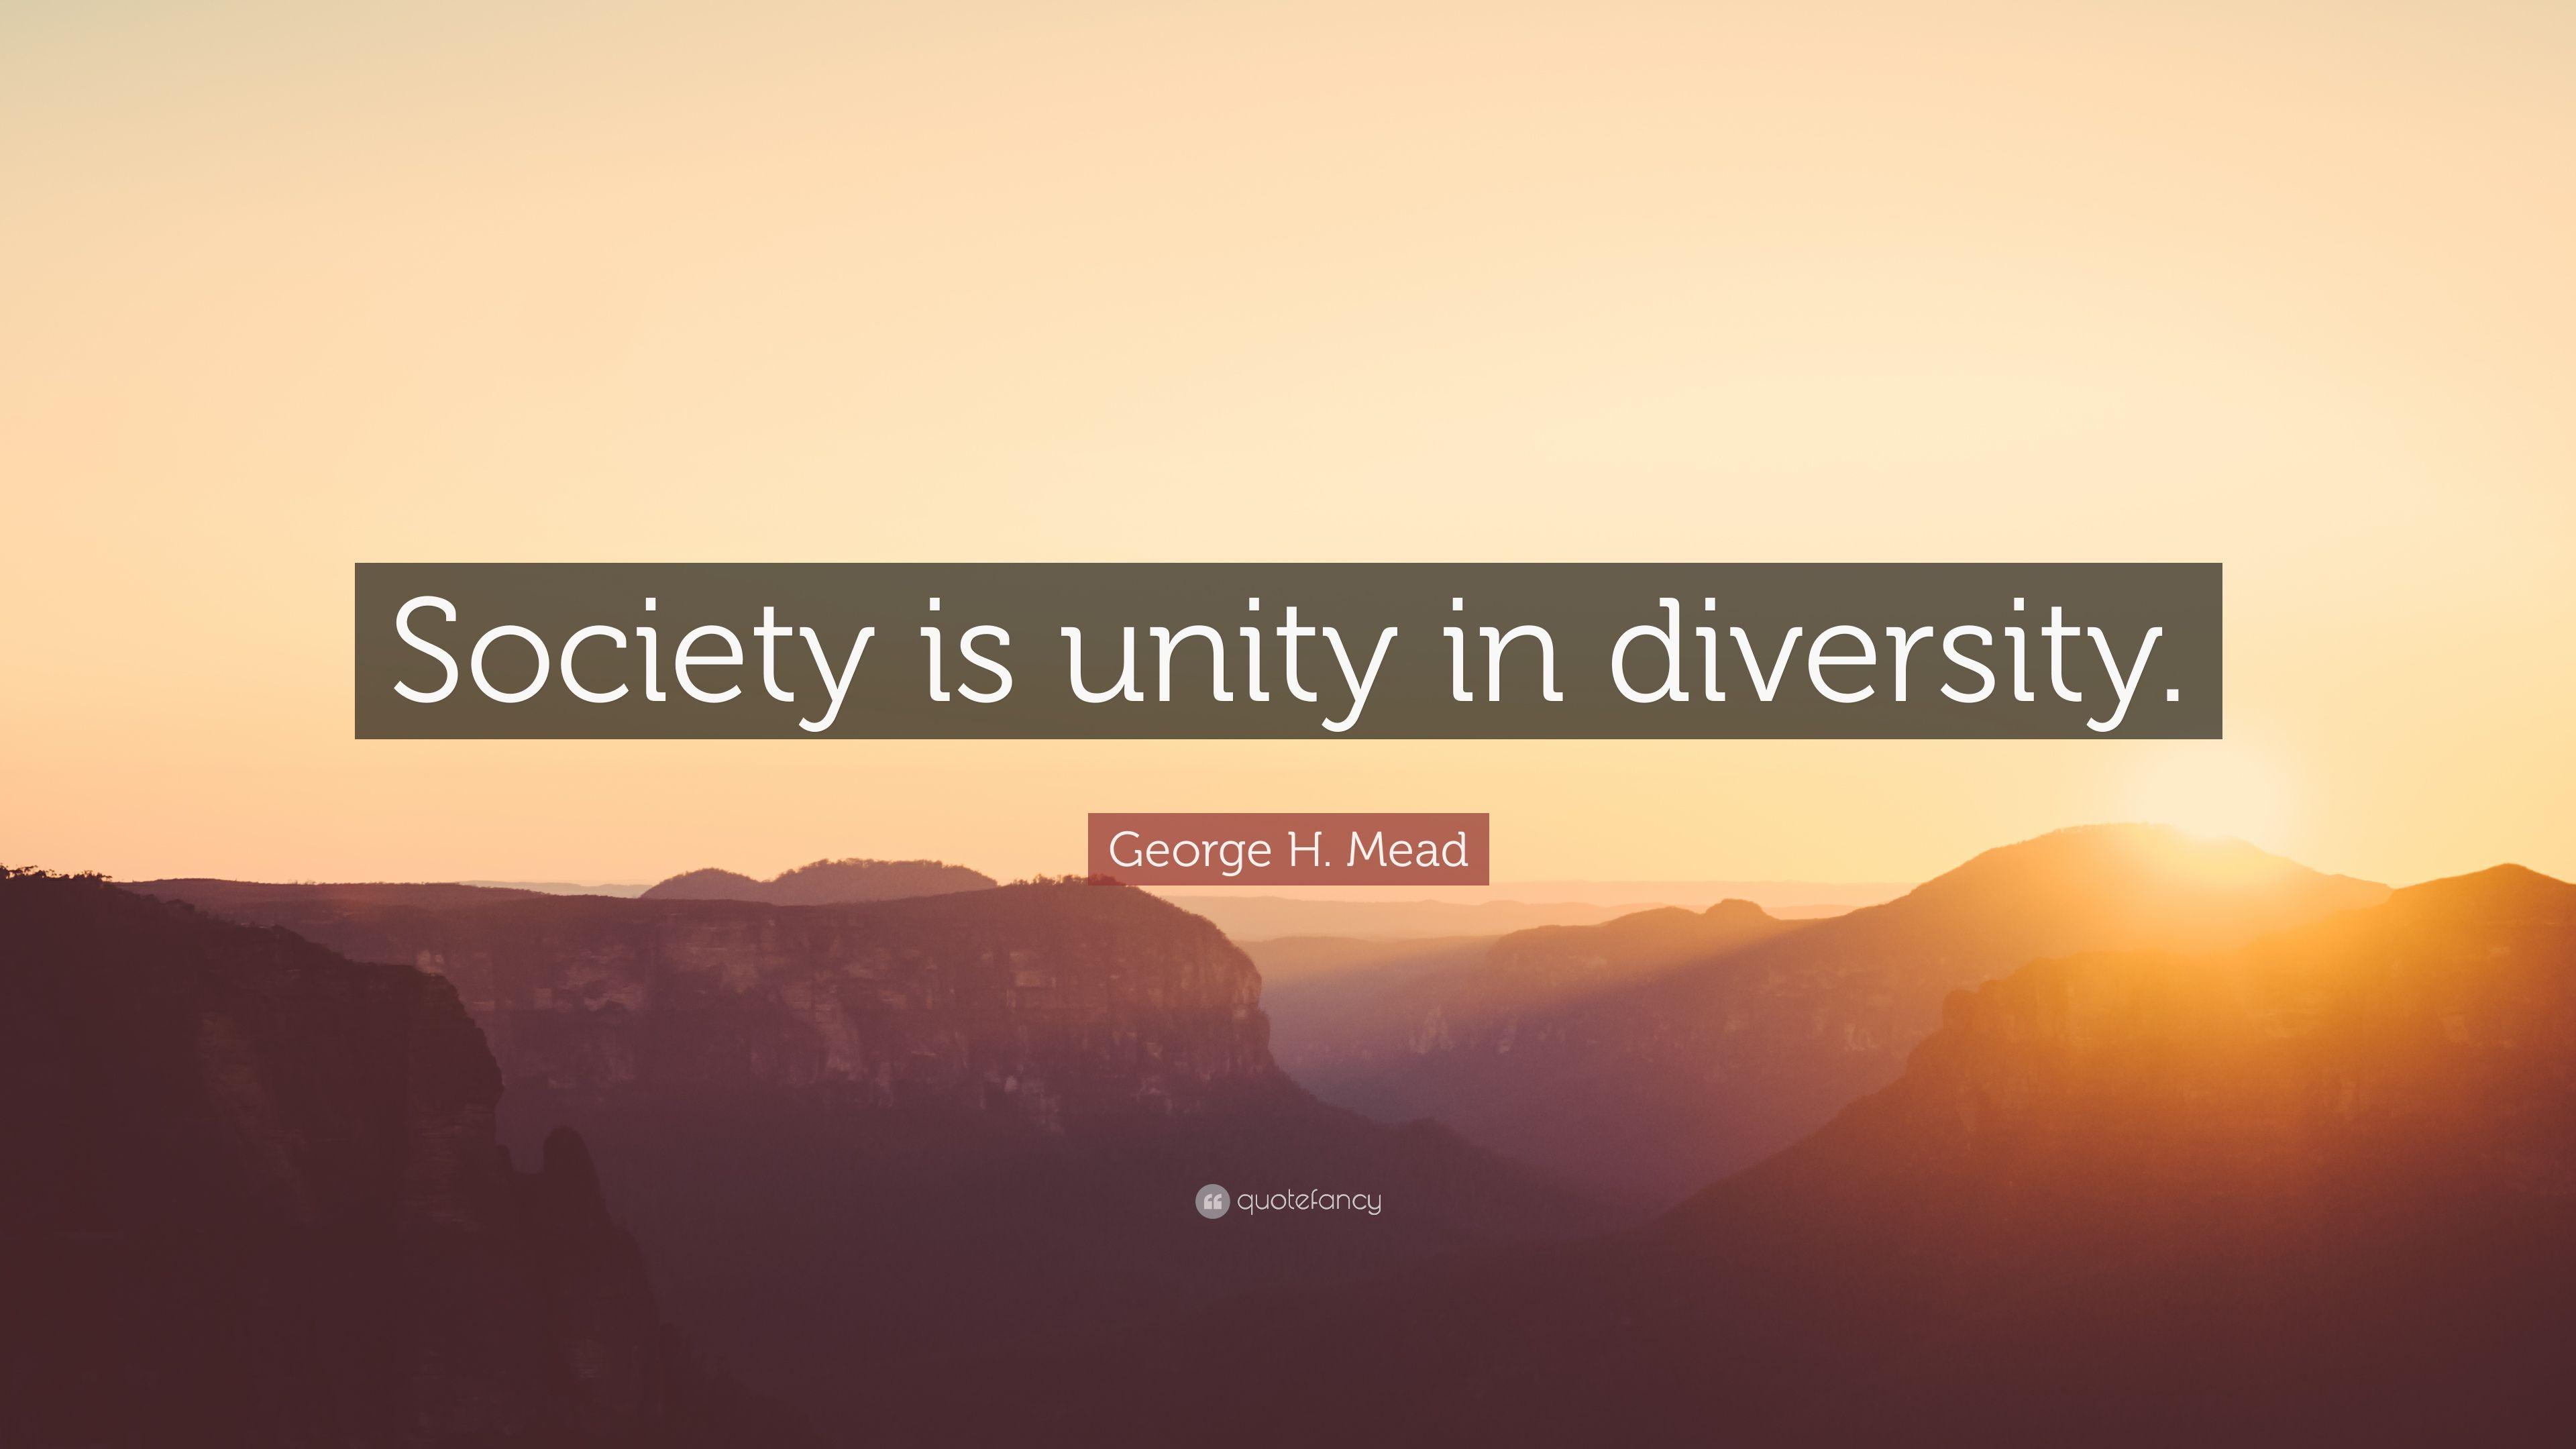 George H. Mead Quote: “Society is unity in diversity.” 7 wallpaper